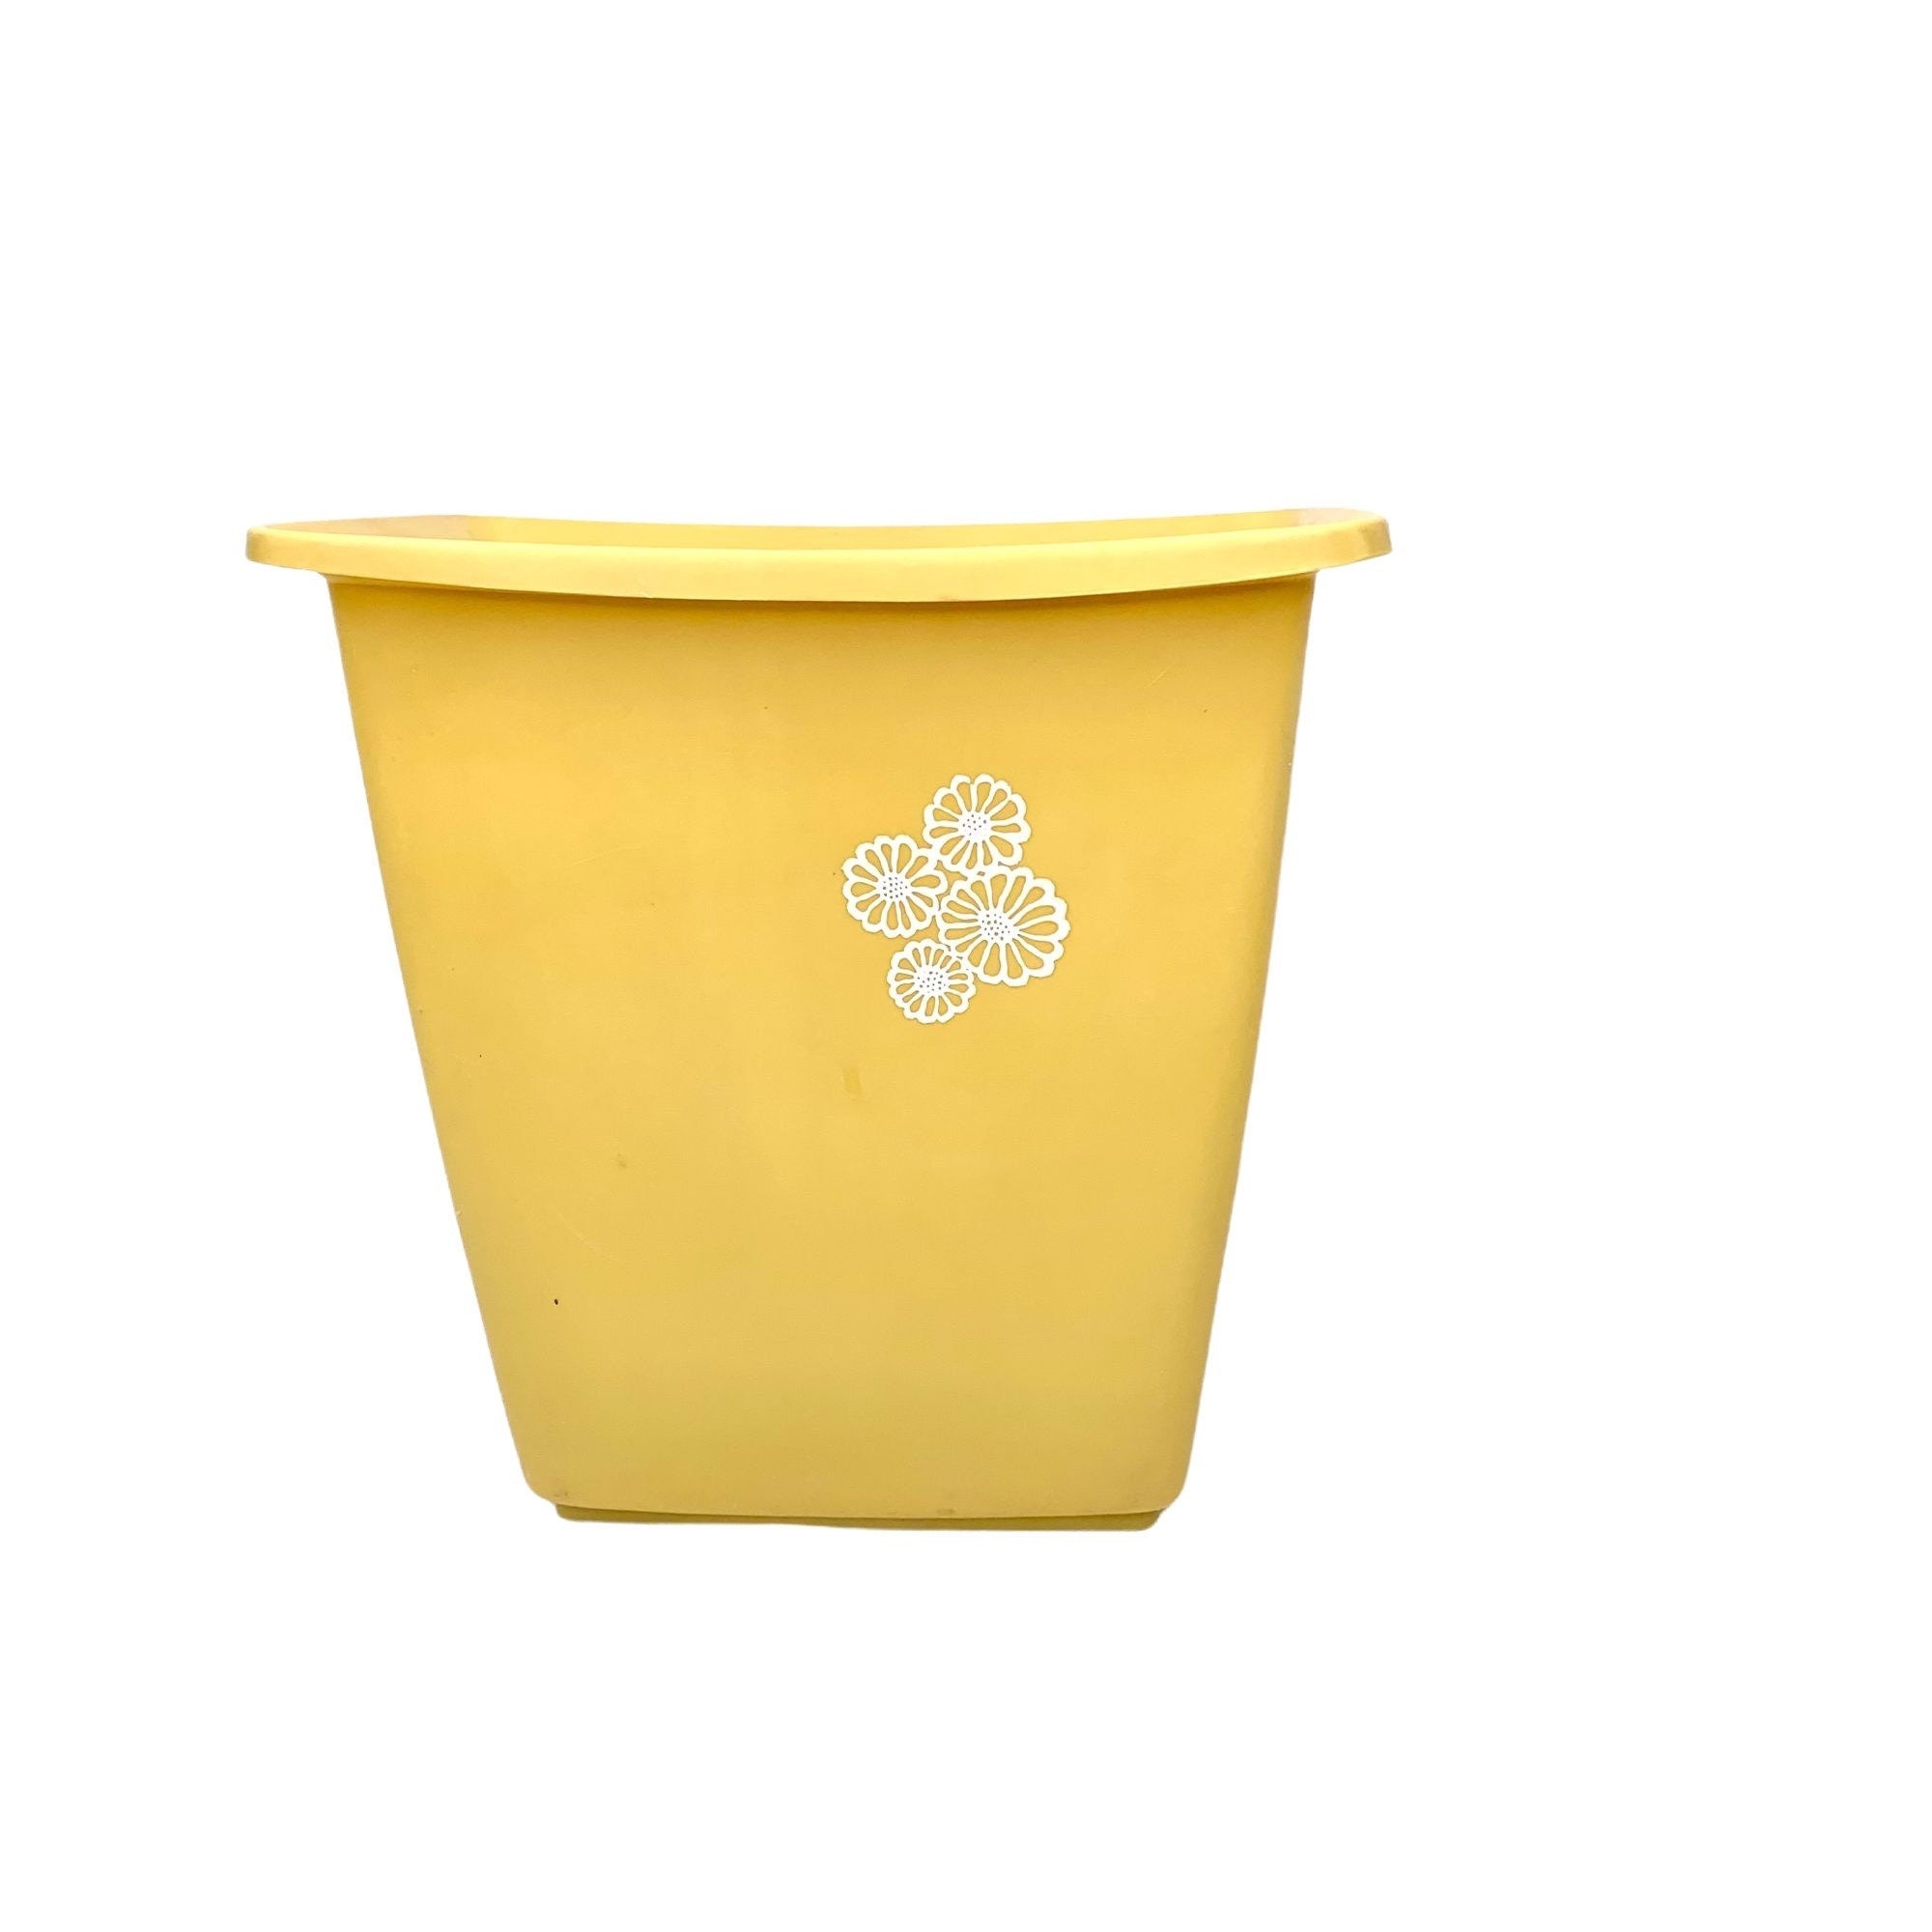 Vintage Rubbermaid Plastic Trash Can Yellow With White Flowers 